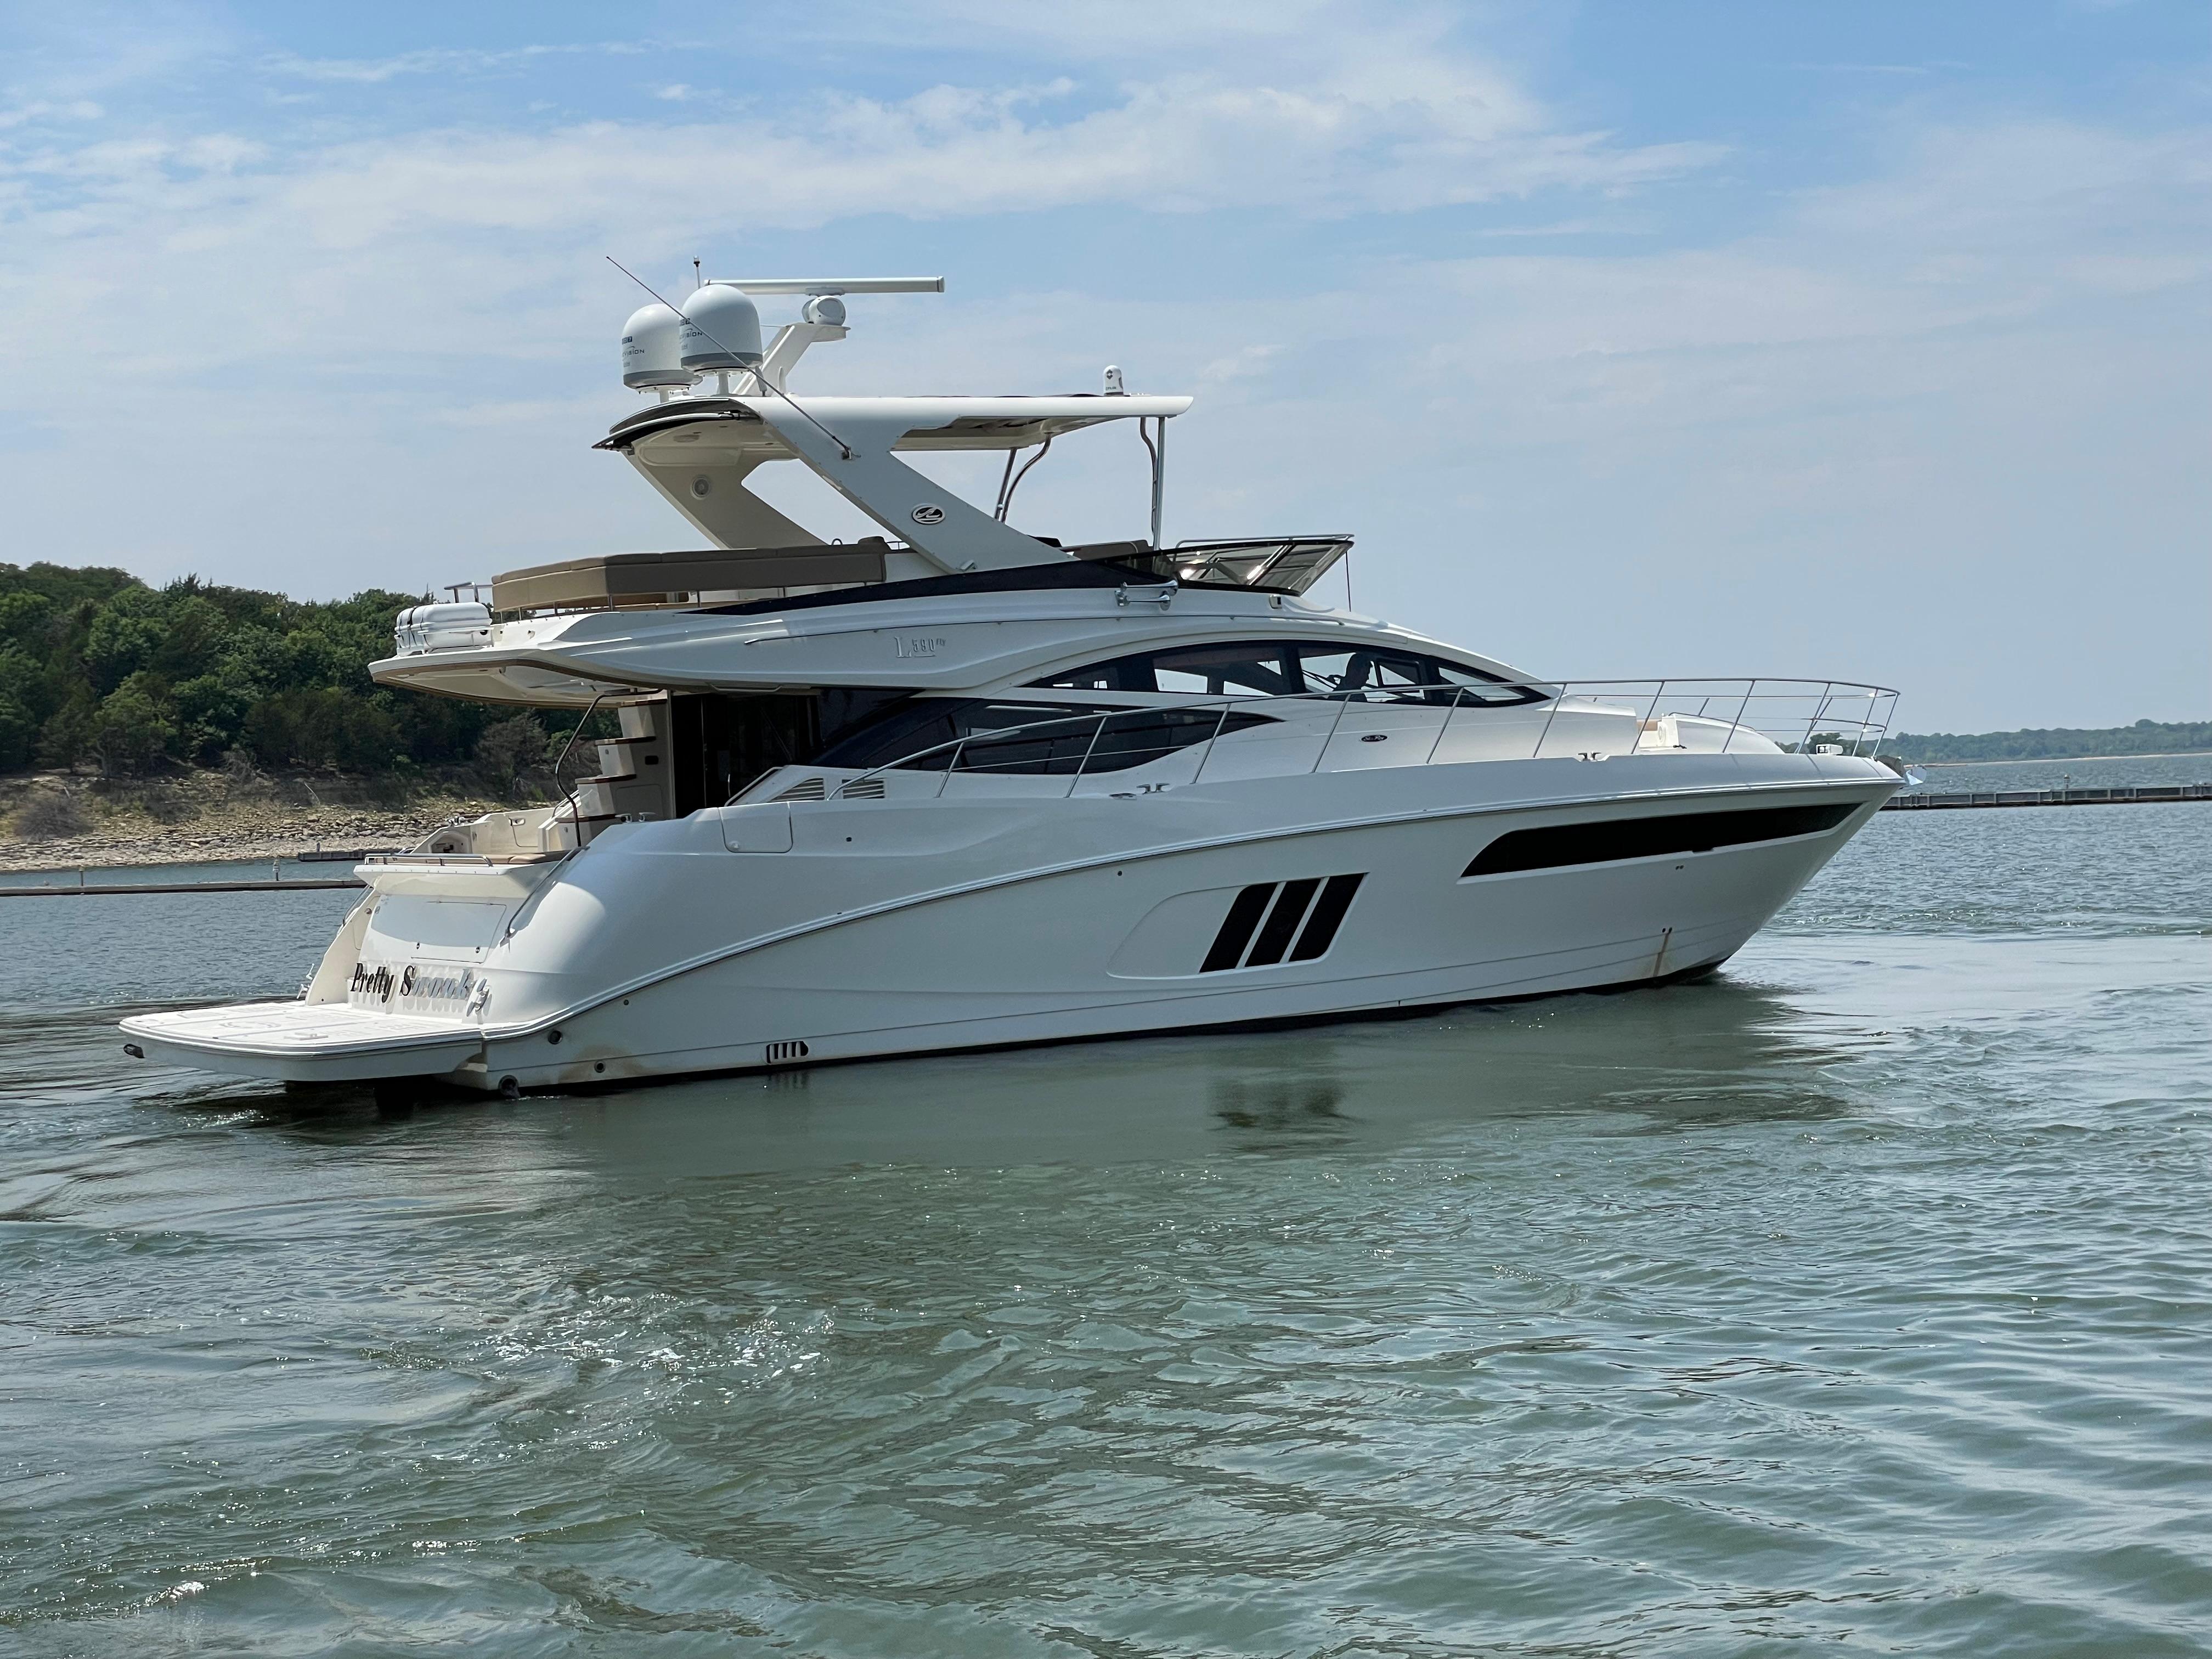 2017 Sea Ray L590 Fly Motor Yachts for sale - YachtWorld